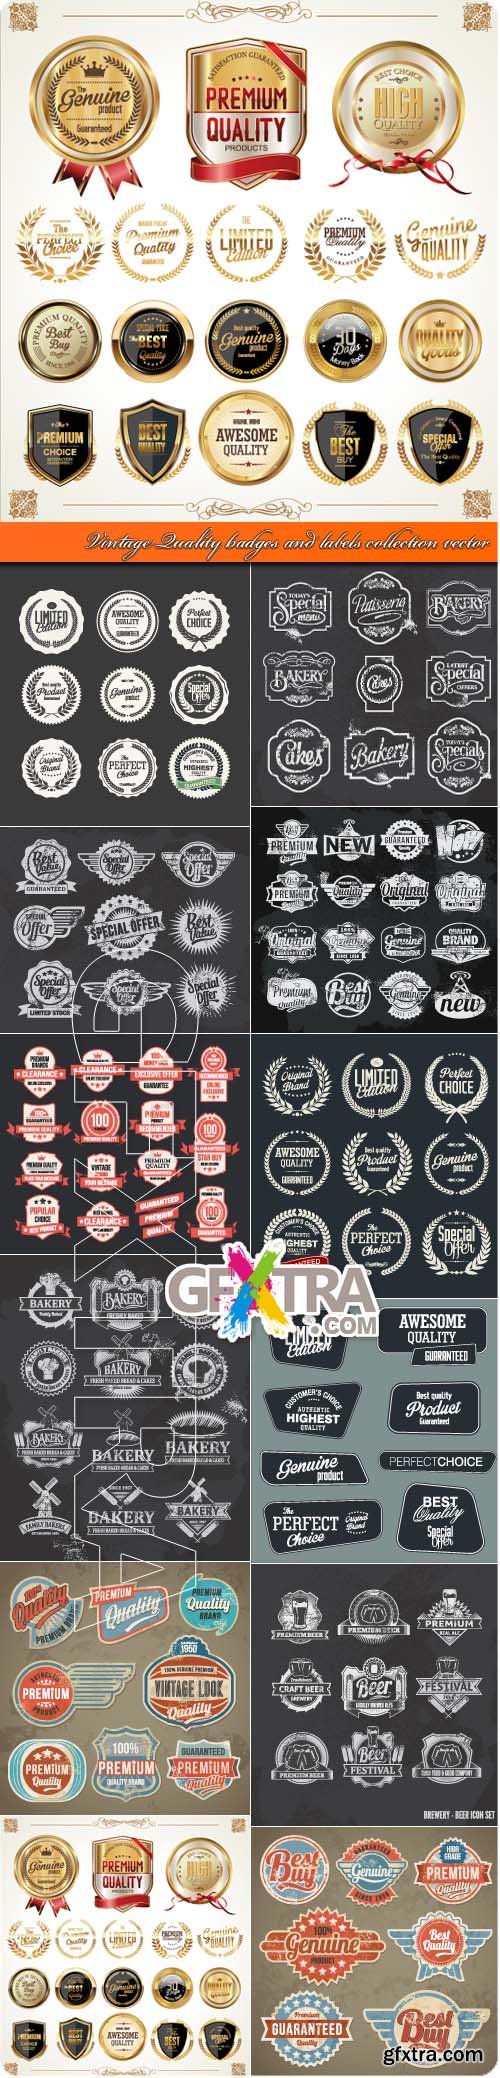 Vintage Quality badges and labels collection vector